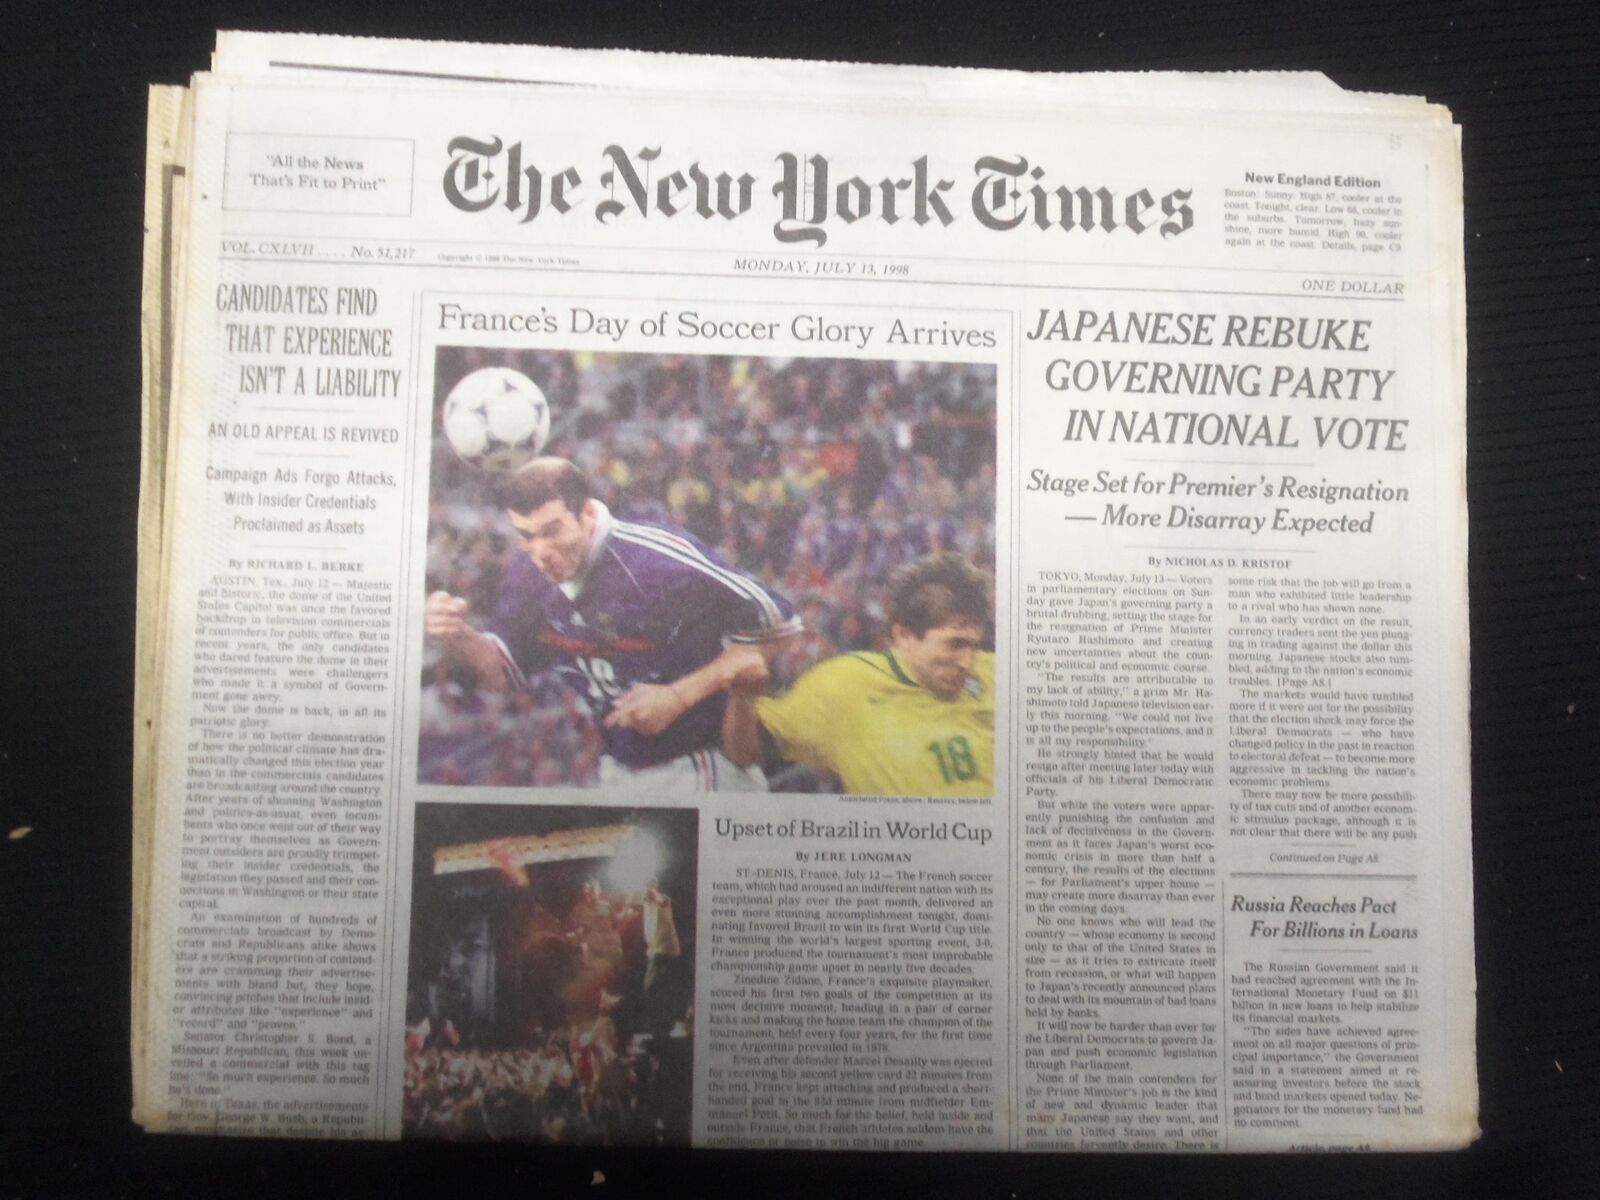 1998 JULY 13 NEW YORK TIMES NEWSPAPER -JAPANESE REBUKE GOVERNING PARTY - NP 7047